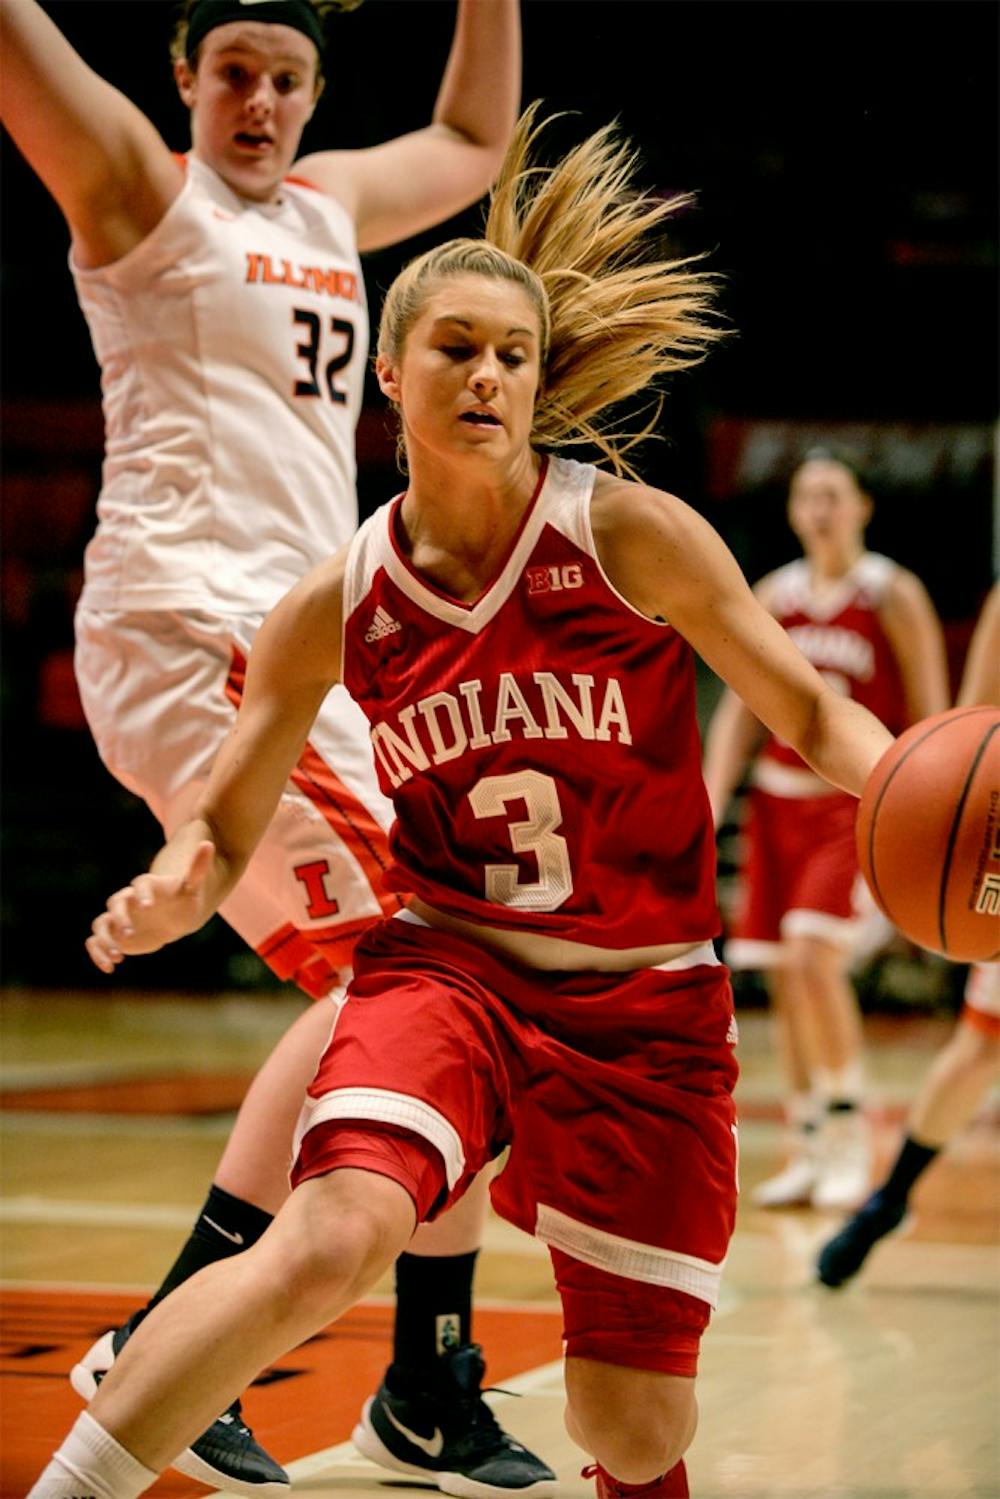 Sophomore guard Tyra Buss rushes down the court against Illinois. The Hoosiers defeated the Fighting Illini 80-68 Wednesday at the State Farm Center.